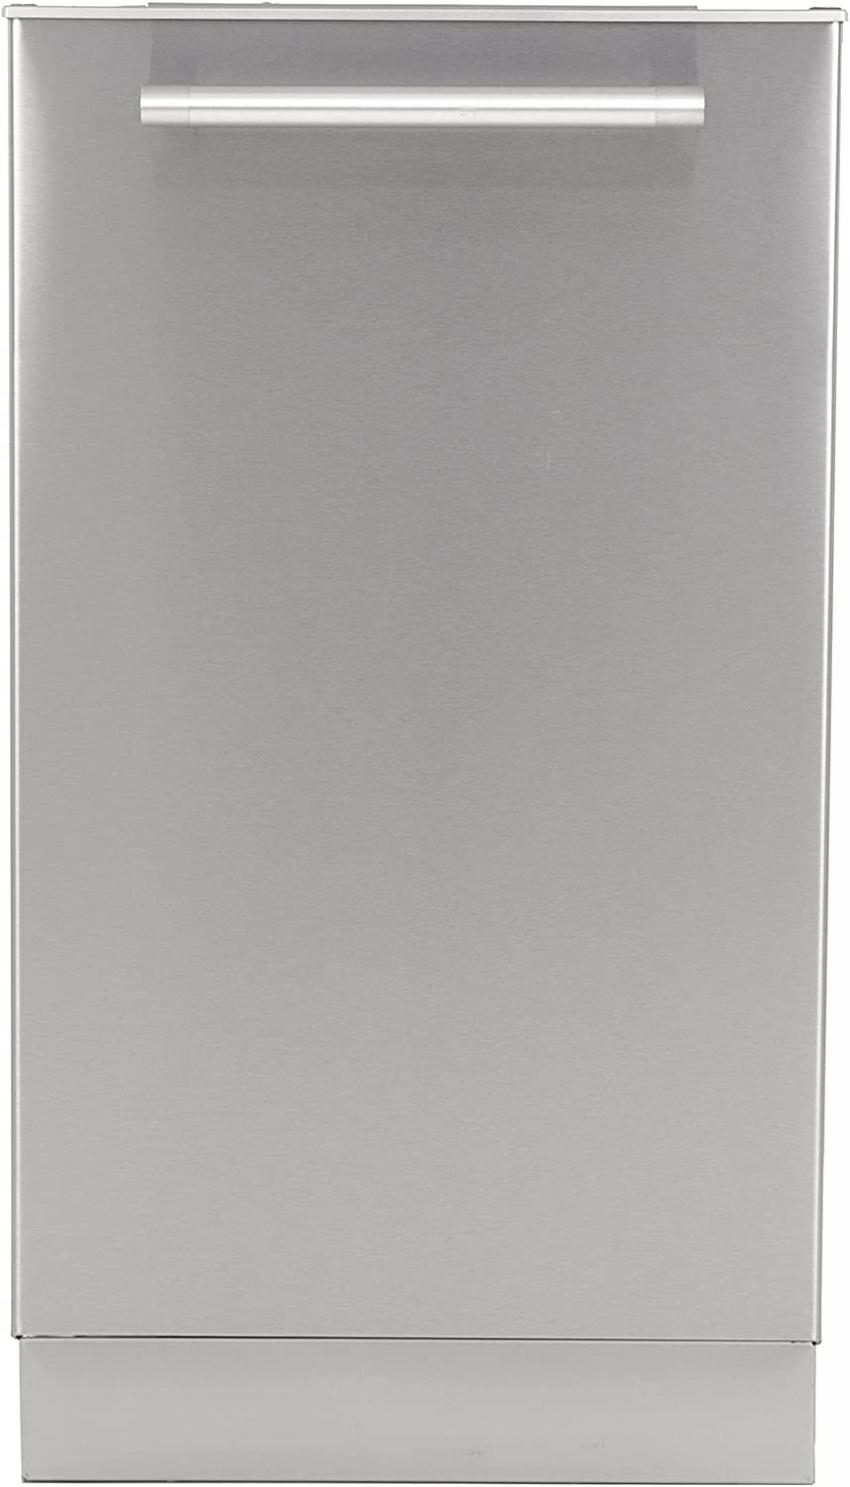 Avanti DWT18V3S Dishwasher 18-Inch Built in with 3 Wash Options and 6 Automatic Cycles, Stainless Steel Construction with Electronic Control LED Display, Low Noise Rating, Metallic